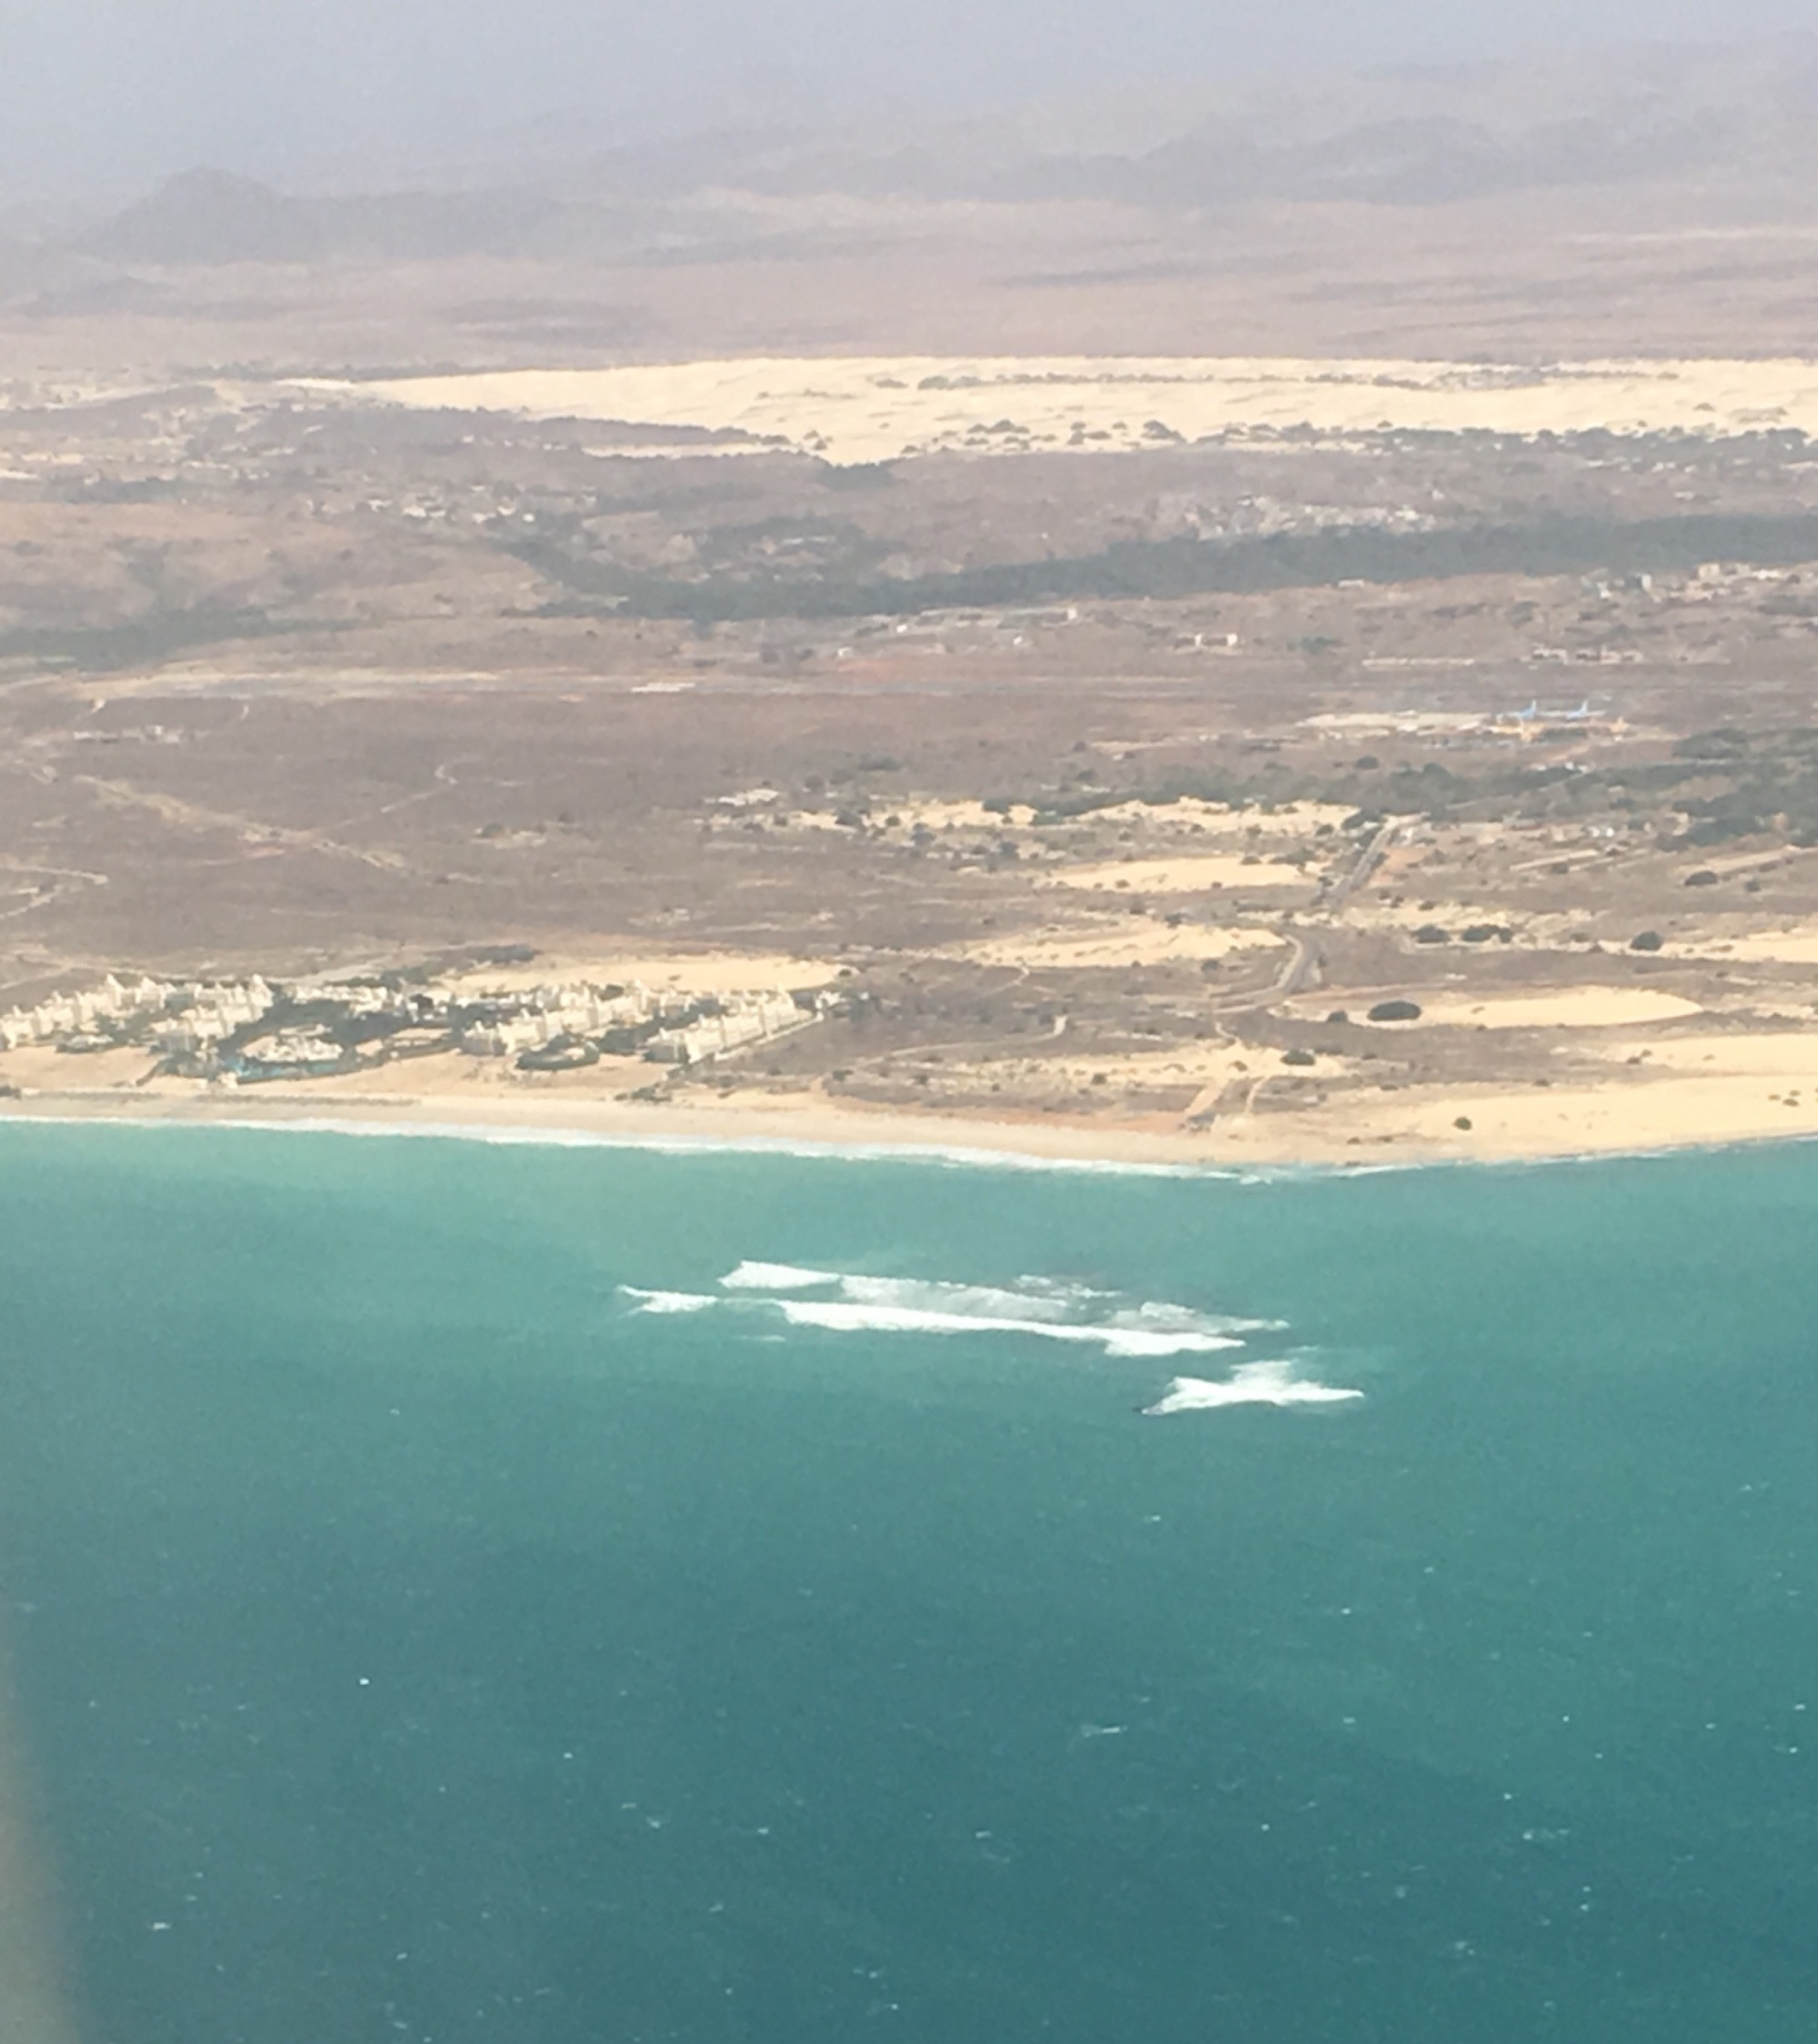 Approaching Boa Vista airport with our hotel in view